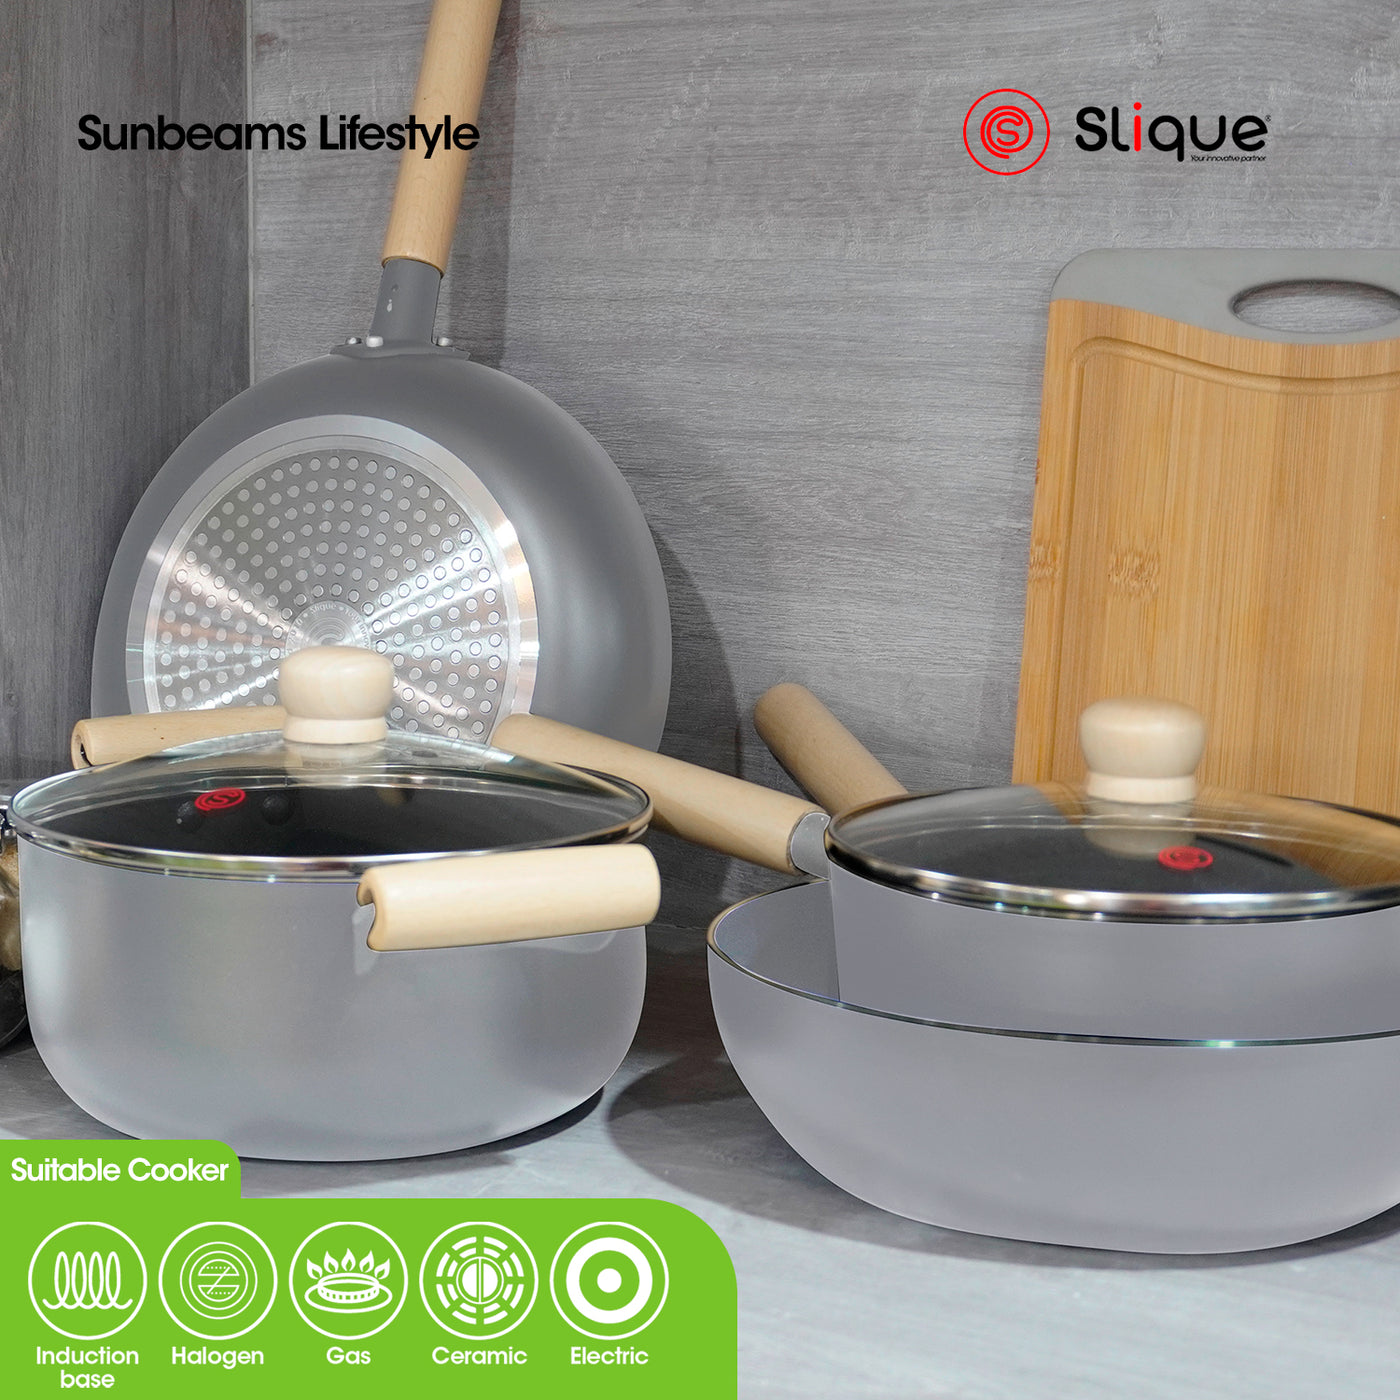 Slique Fry Pan Stainless Steel Multi Layer Non-Stick Ceramic Coating - Grey Induction Base, Wooden Bakelite Handle Healthy Cooking Essentials Amazing Gift Idea For Any Occasion!